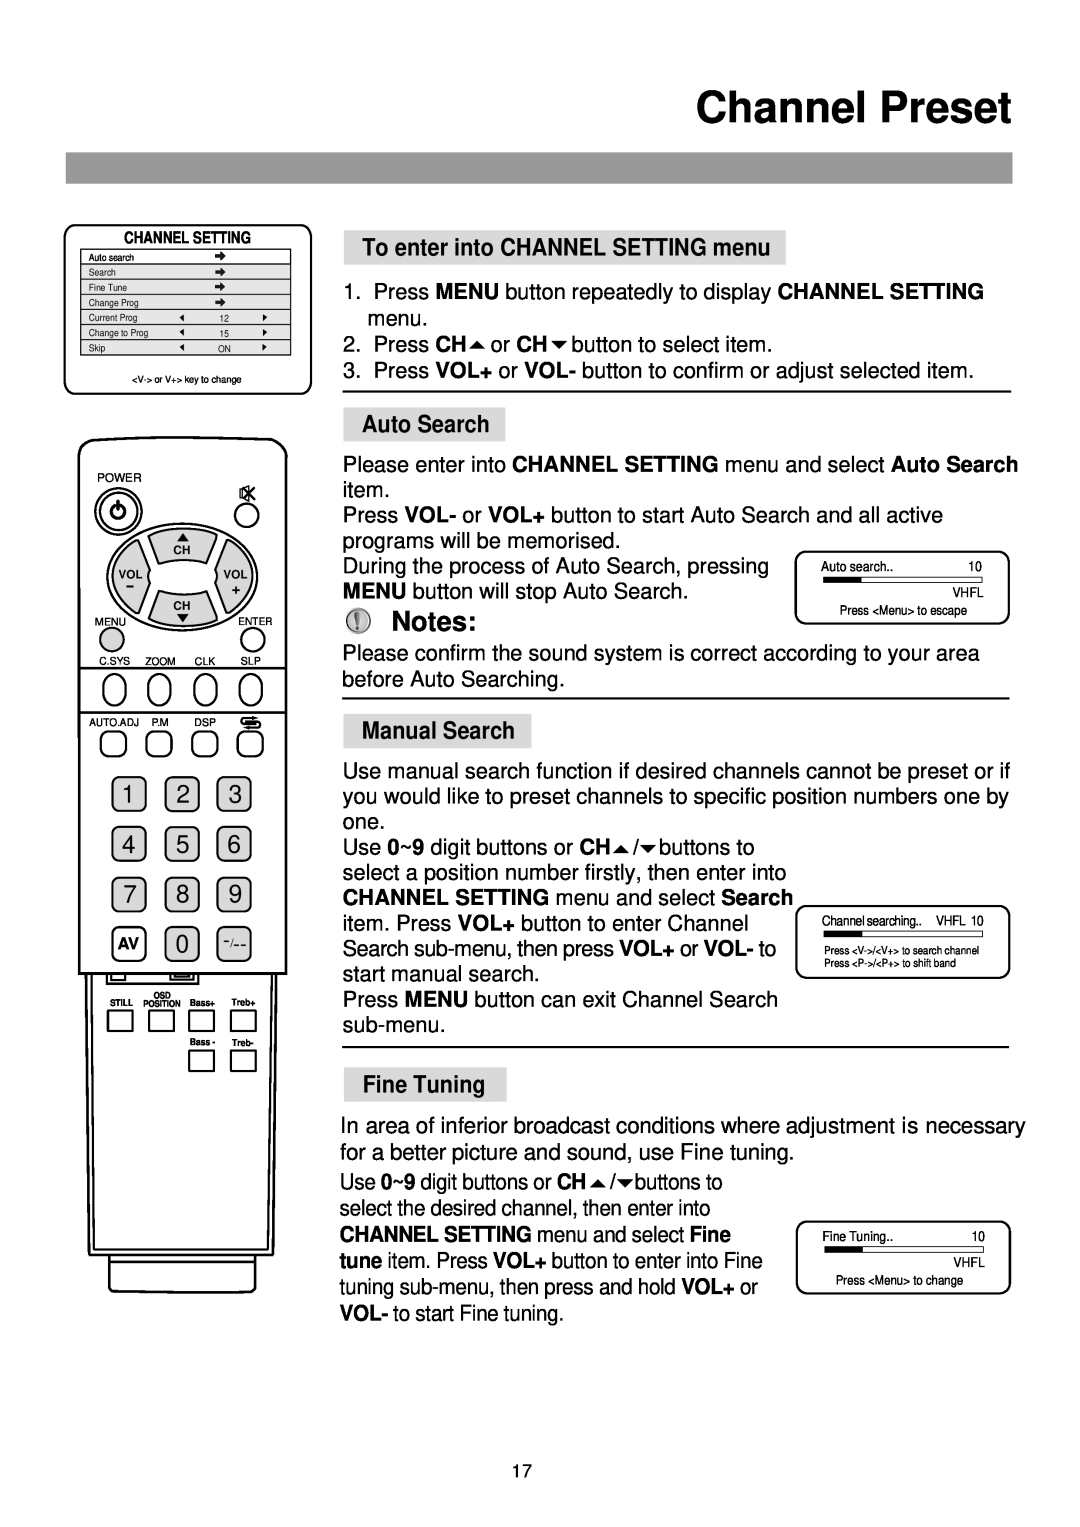 Palsonic TFTV-760 Channel Preset, 1 2 4 5 7 8, To enter into CHANNEL SETTING menu, Auto Search, Manual Search, Fine Tuning 